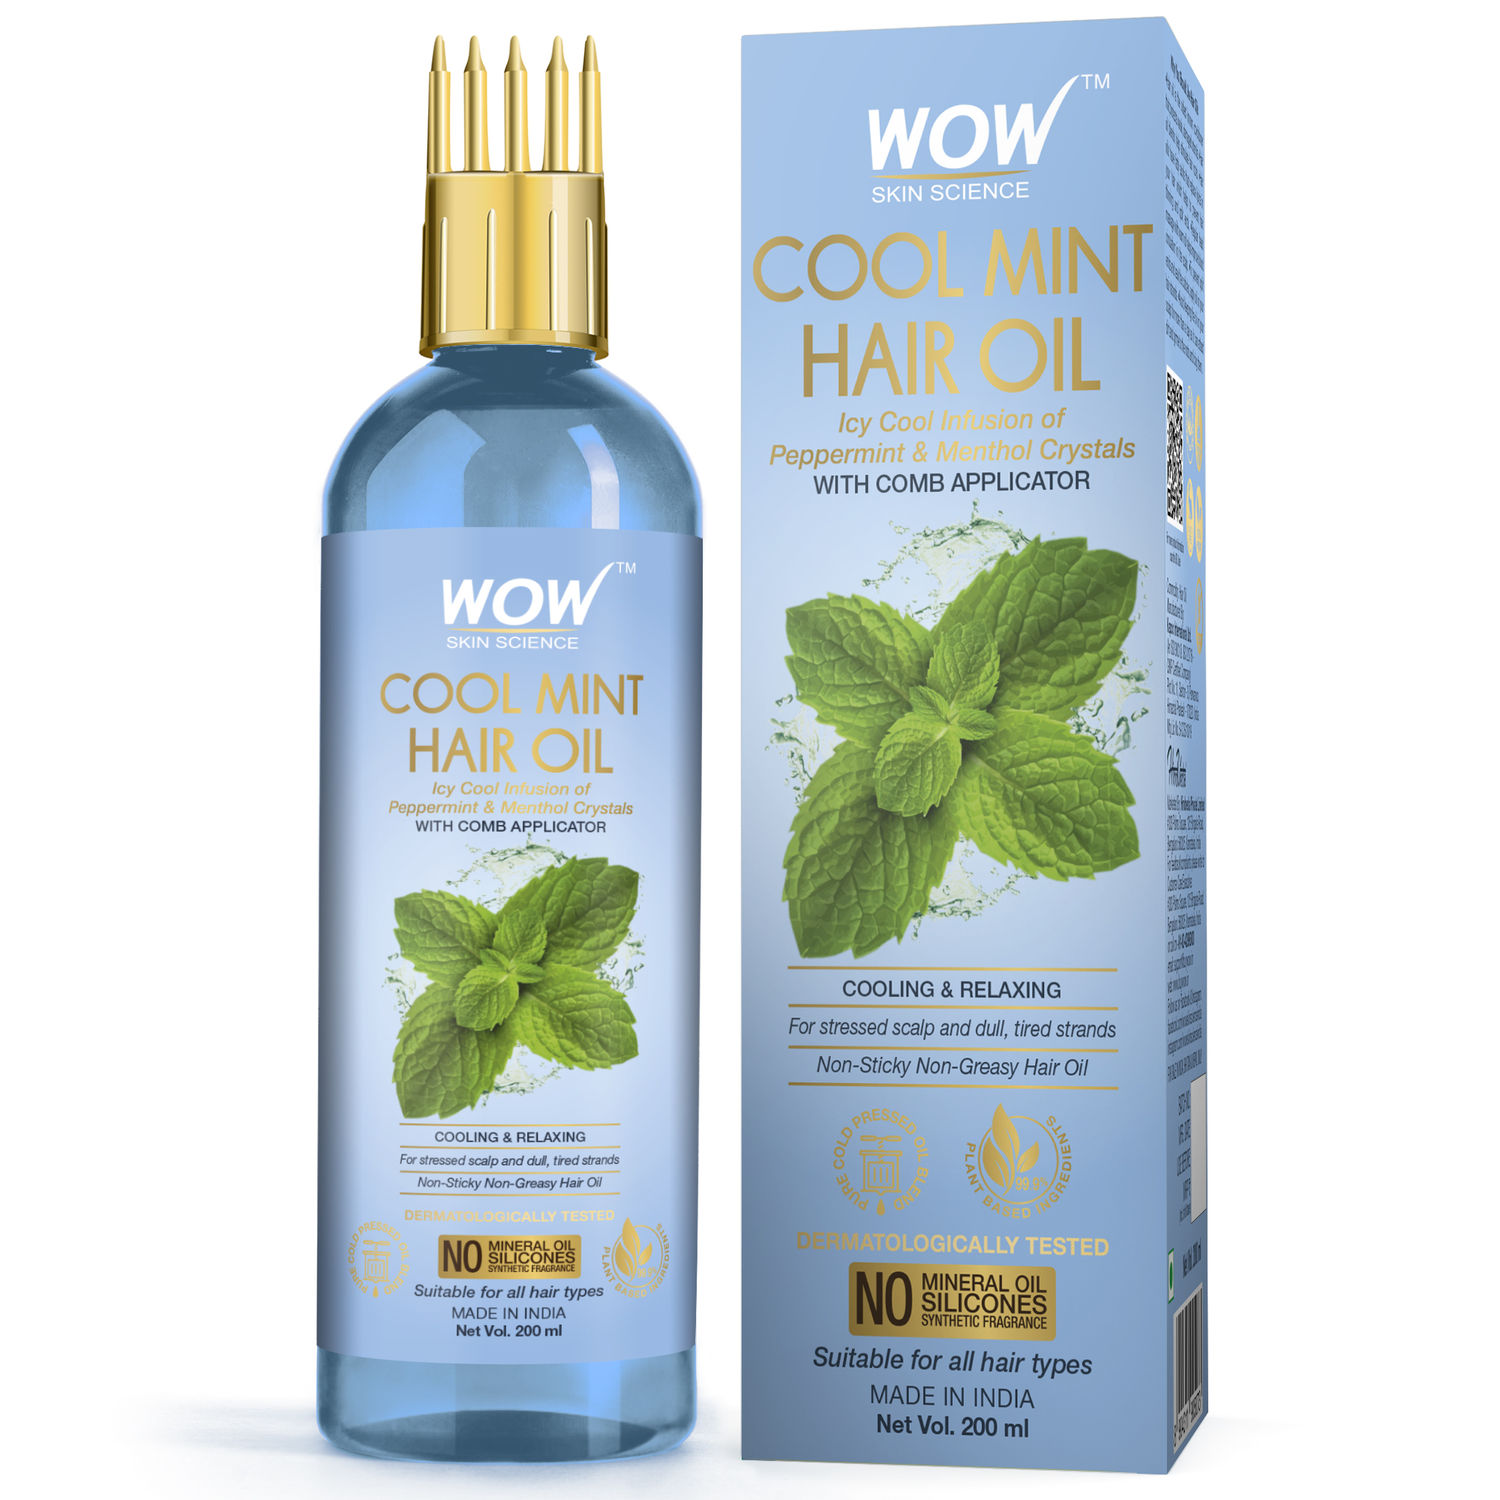 Buy WOW Skin Science Cool Mint Hair Oil - with Comb Applicator - 200mL - Purplle